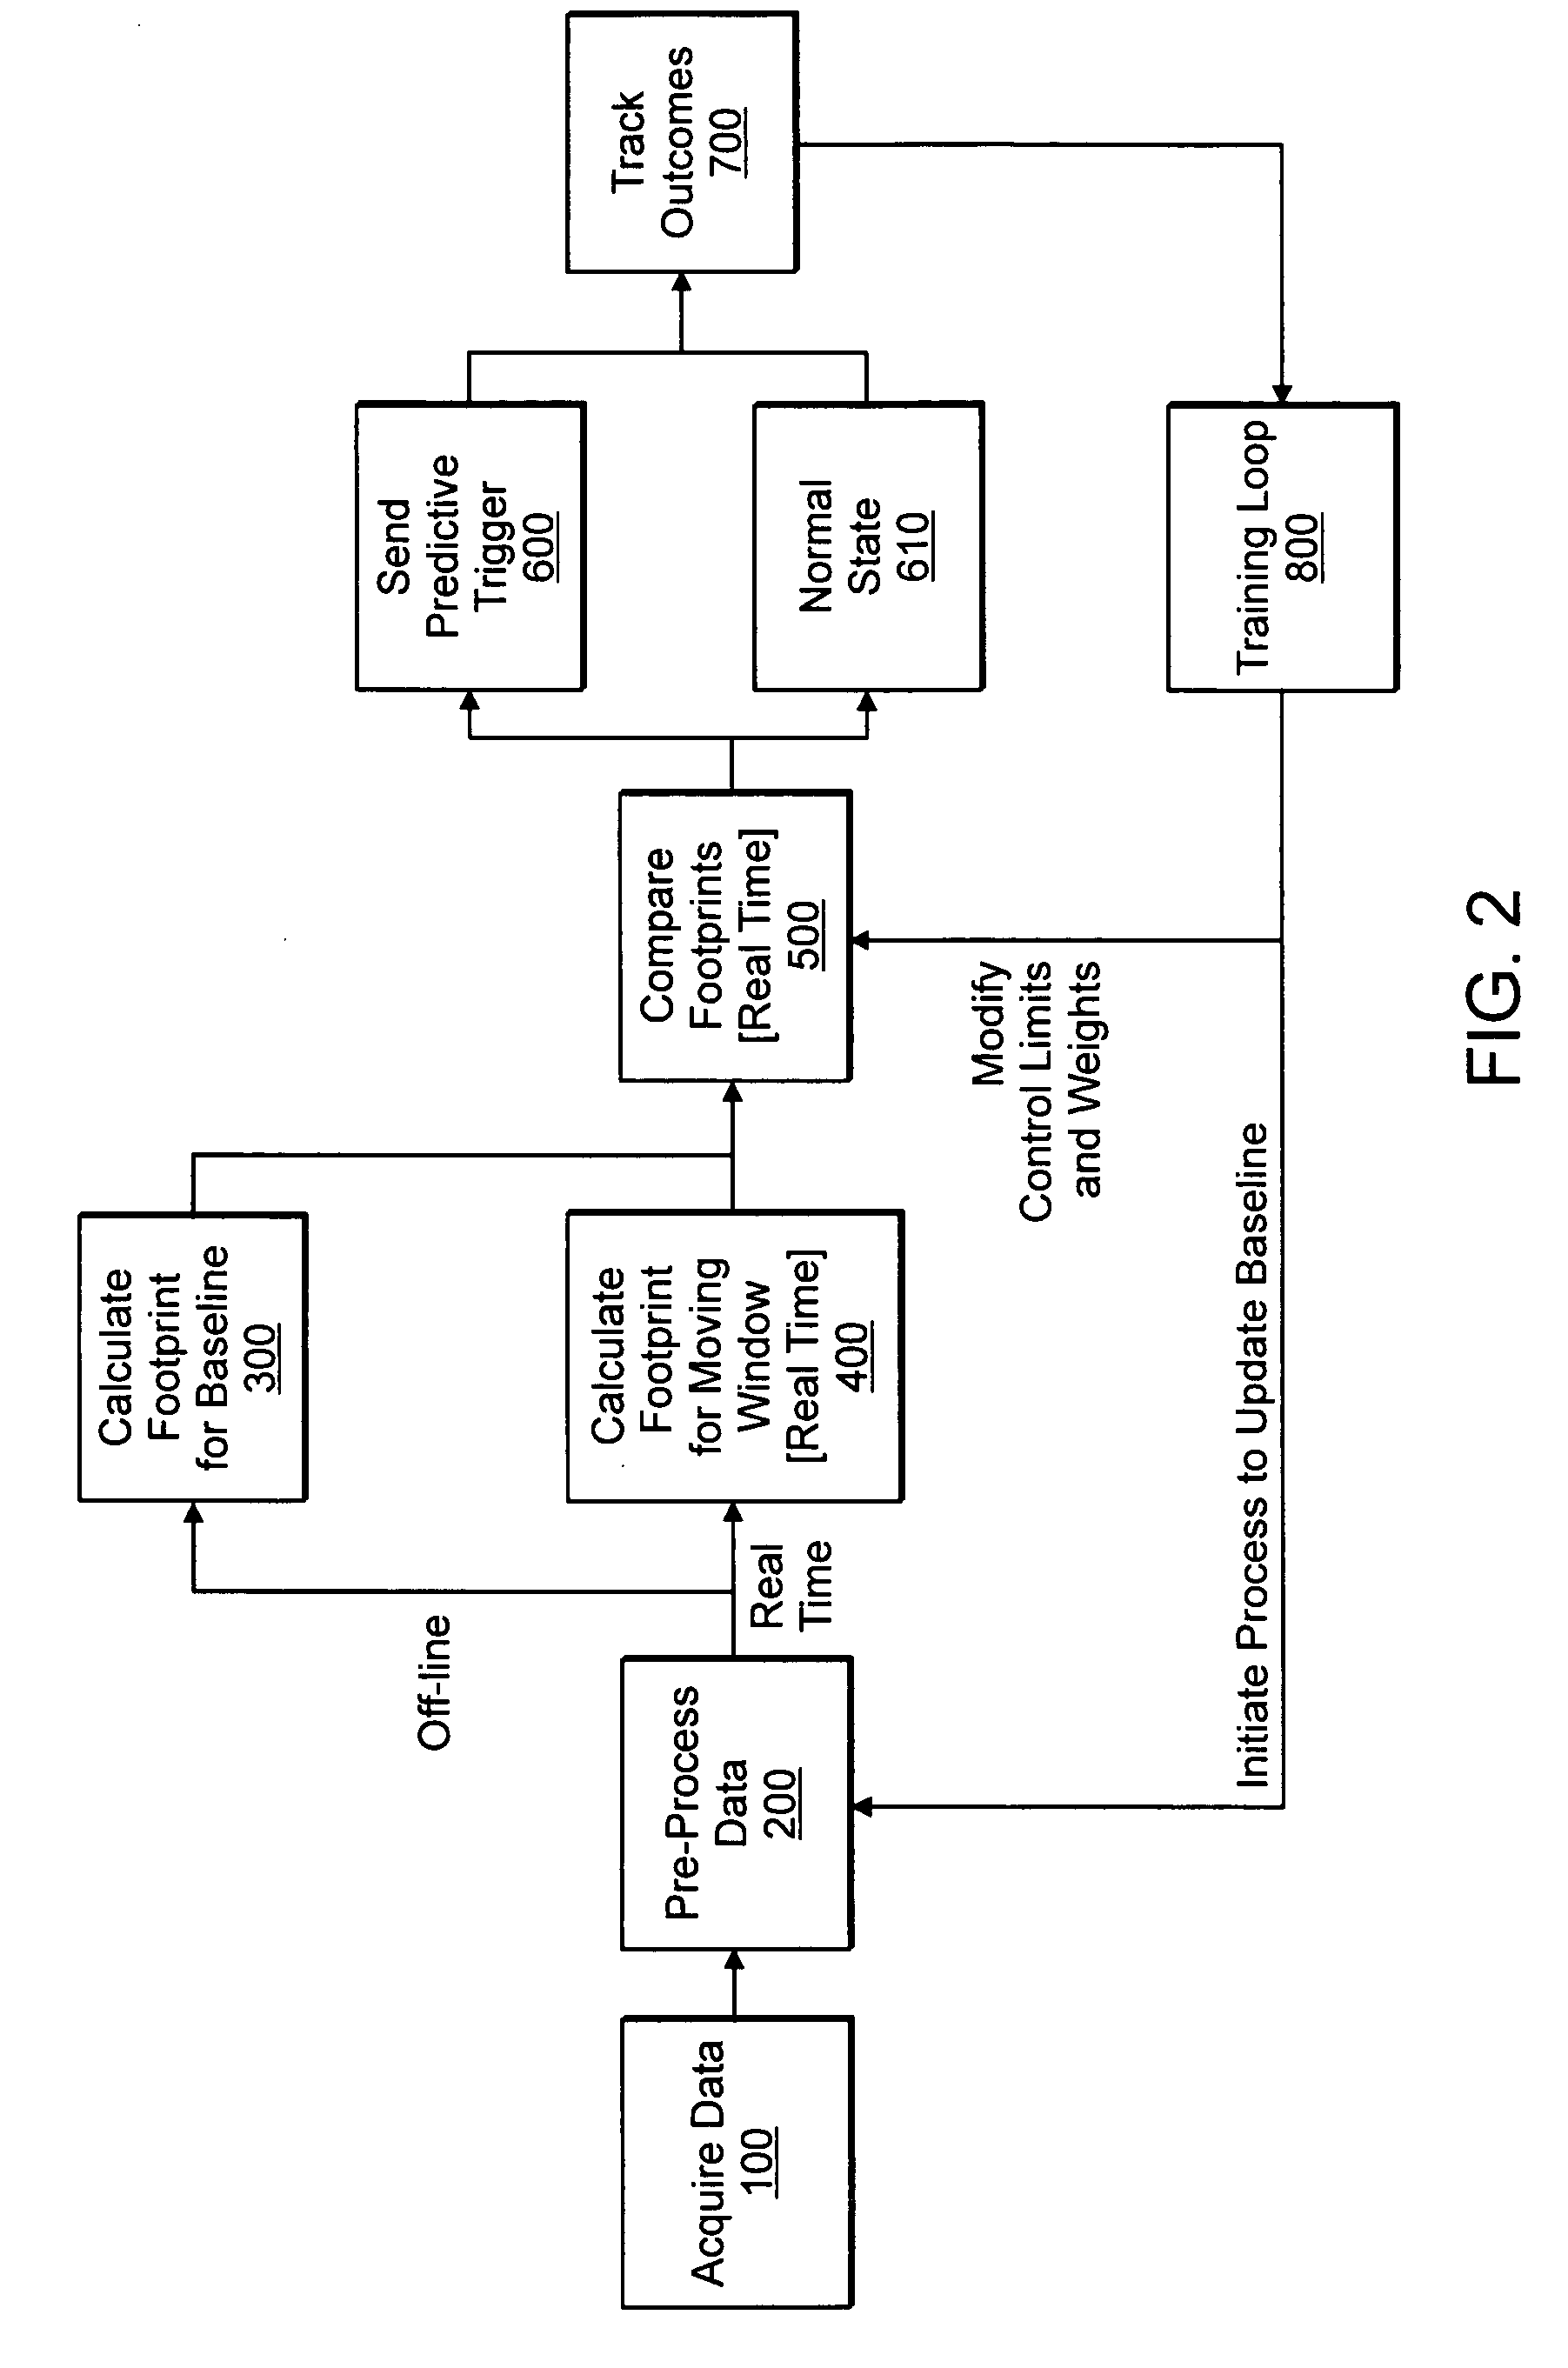 System and method for monitoring performance of network infrastructure and applications by automatically identifying system variables or components constructed from such variables that dominate variance of performance